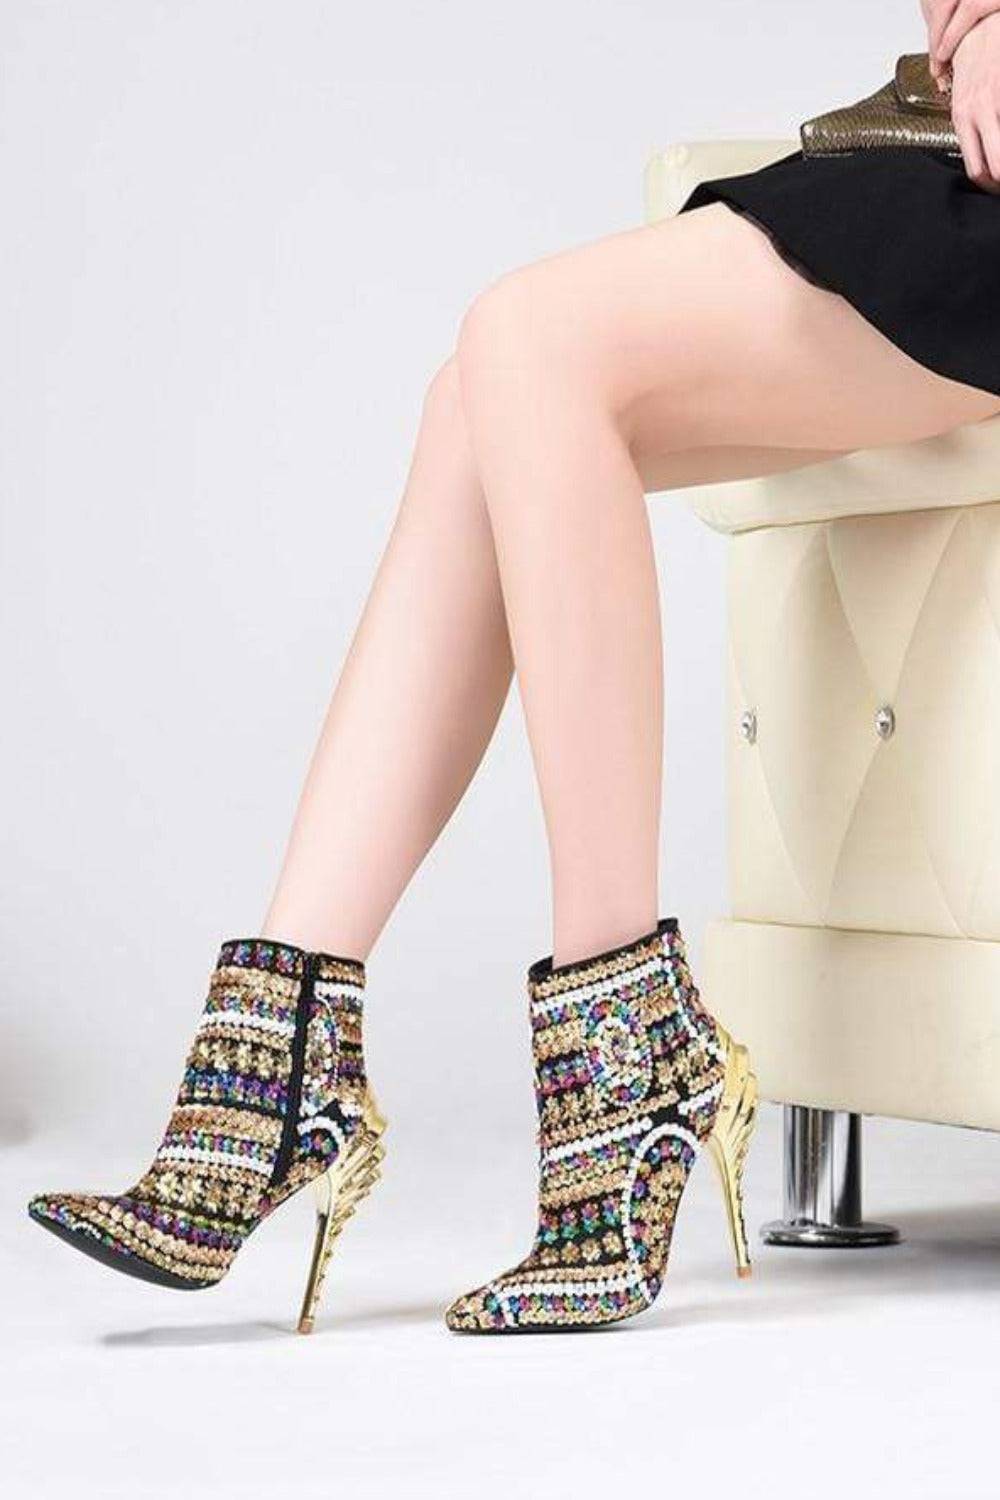 Lady Chick Gold Ankle High Heel Boots - TGC Boutique - Ankle Boots